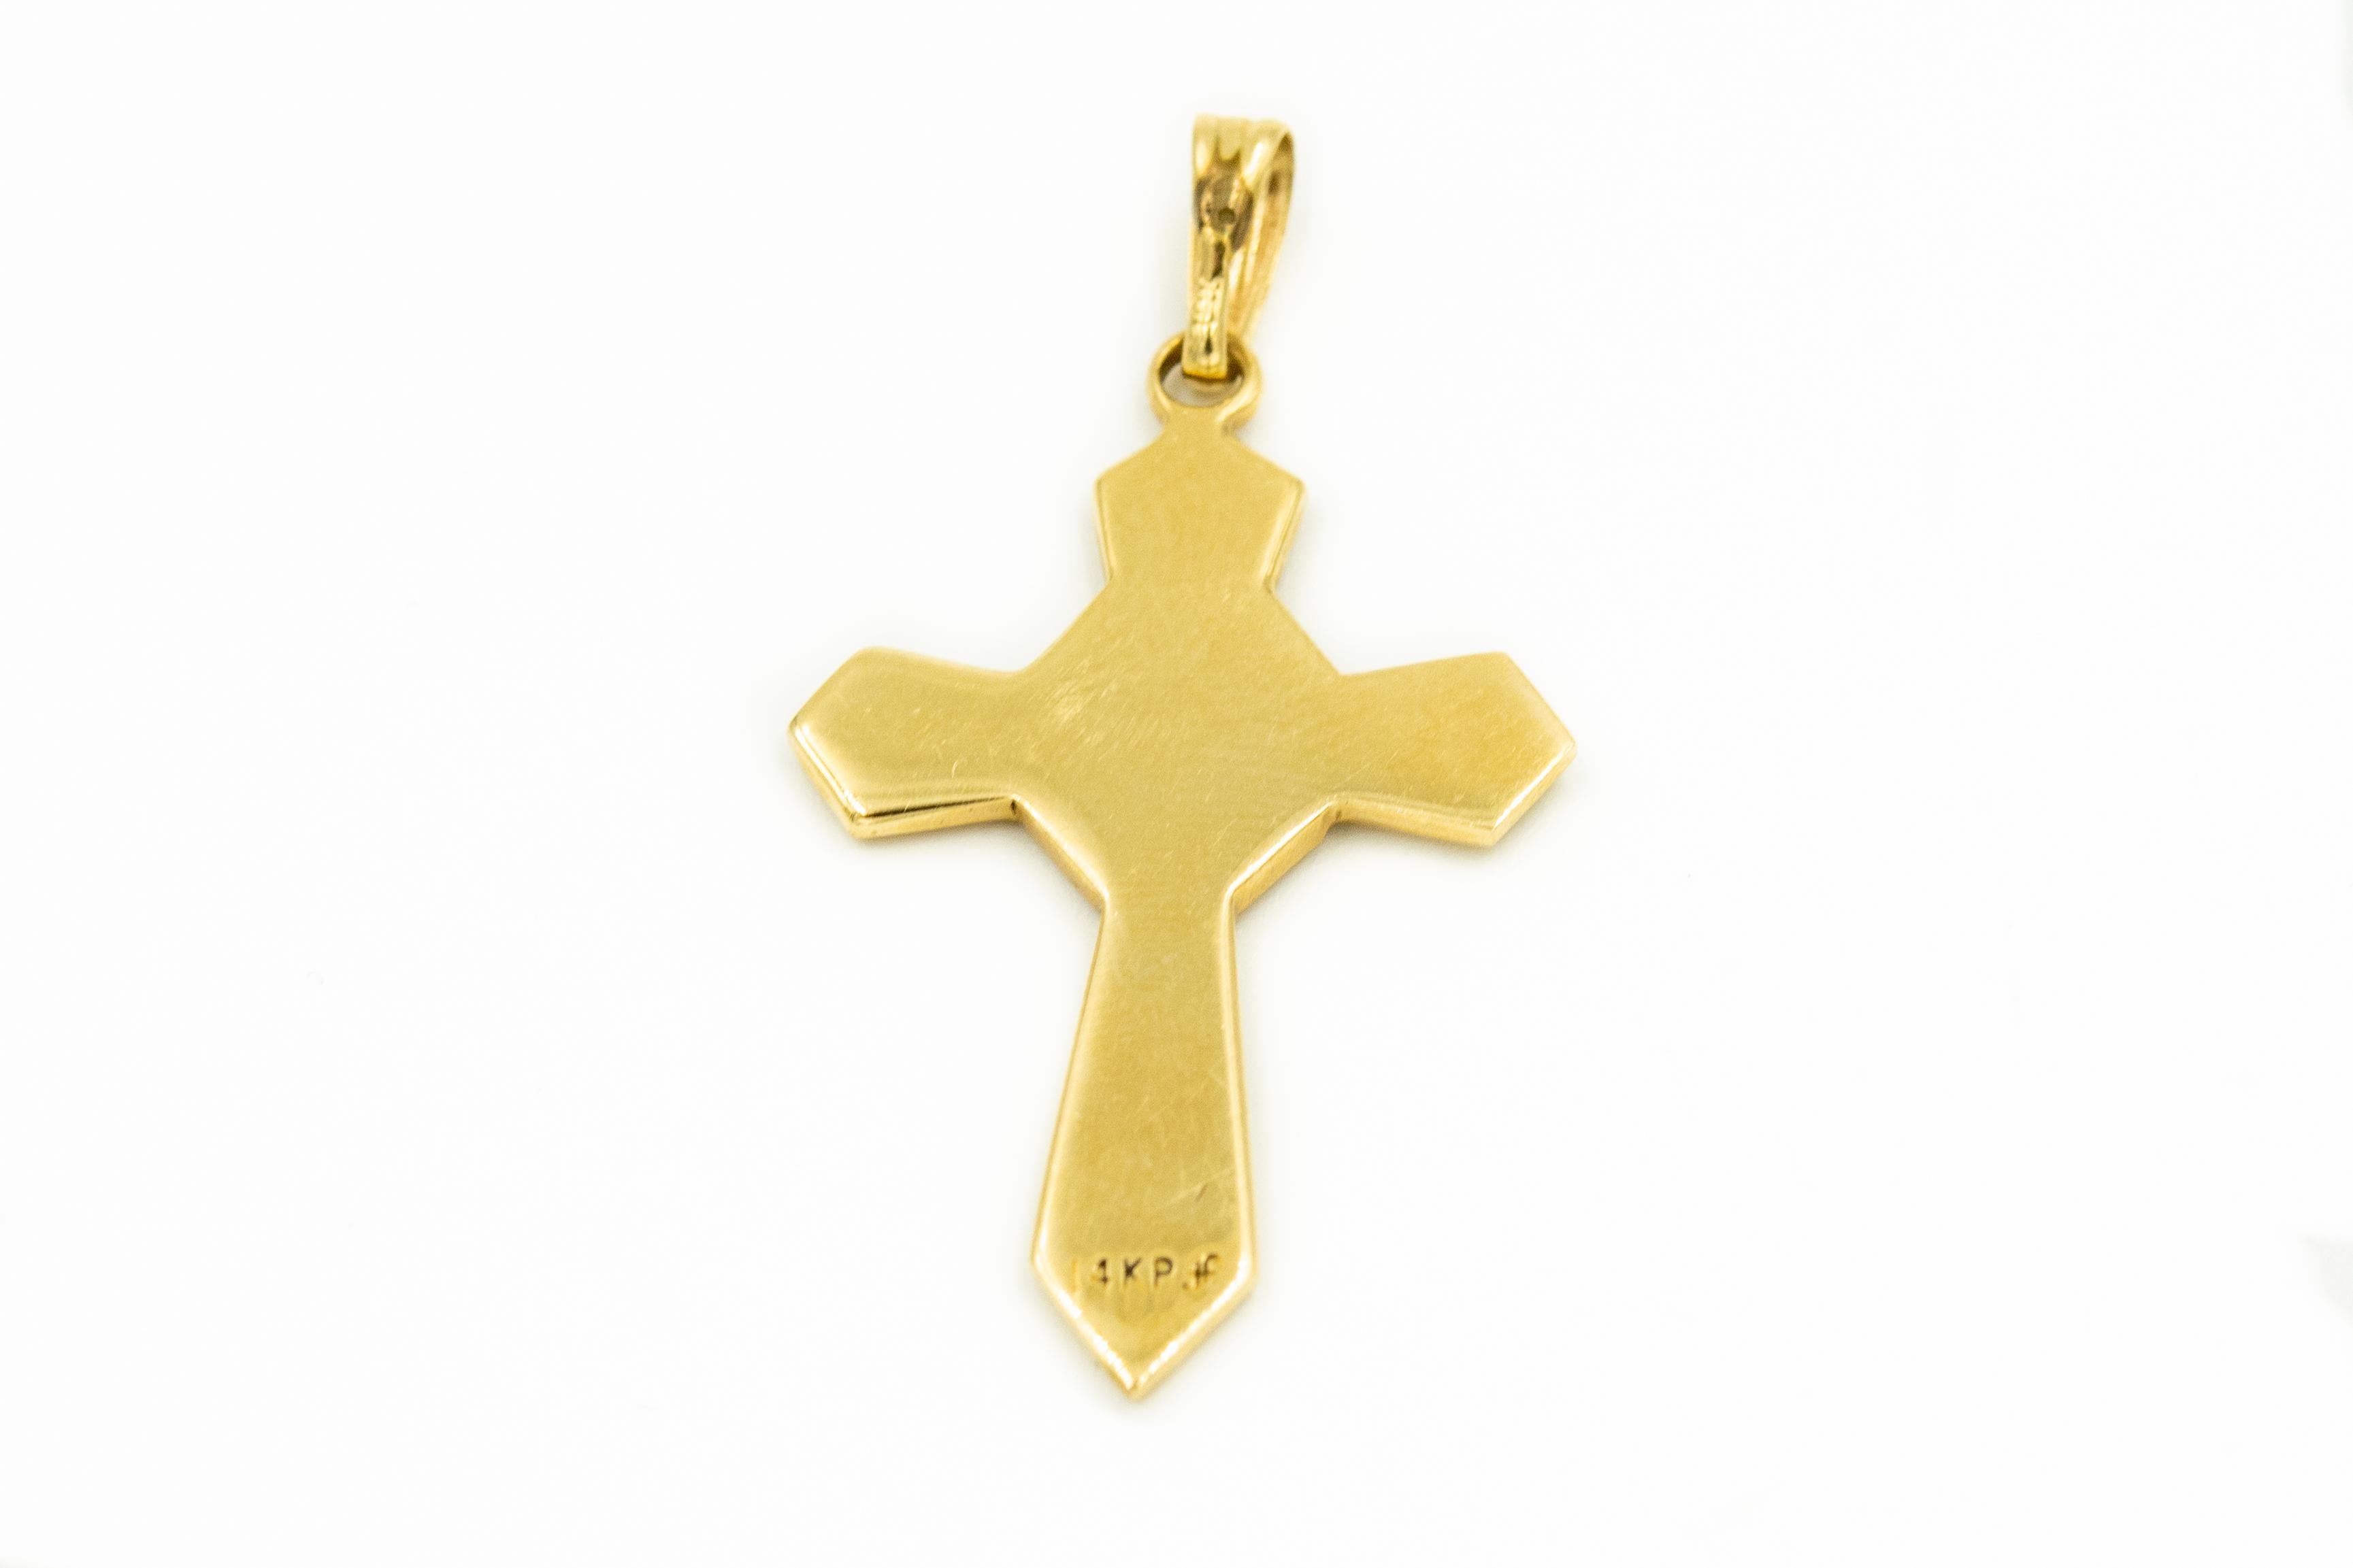 Stylized 14k yellow gold cross featuring an opal mosaic design.  It is hanging from a yellow gold bale.  The bale inside is 2.70mm wide by 3.48mm tall.  The cross without the bale is 1.23